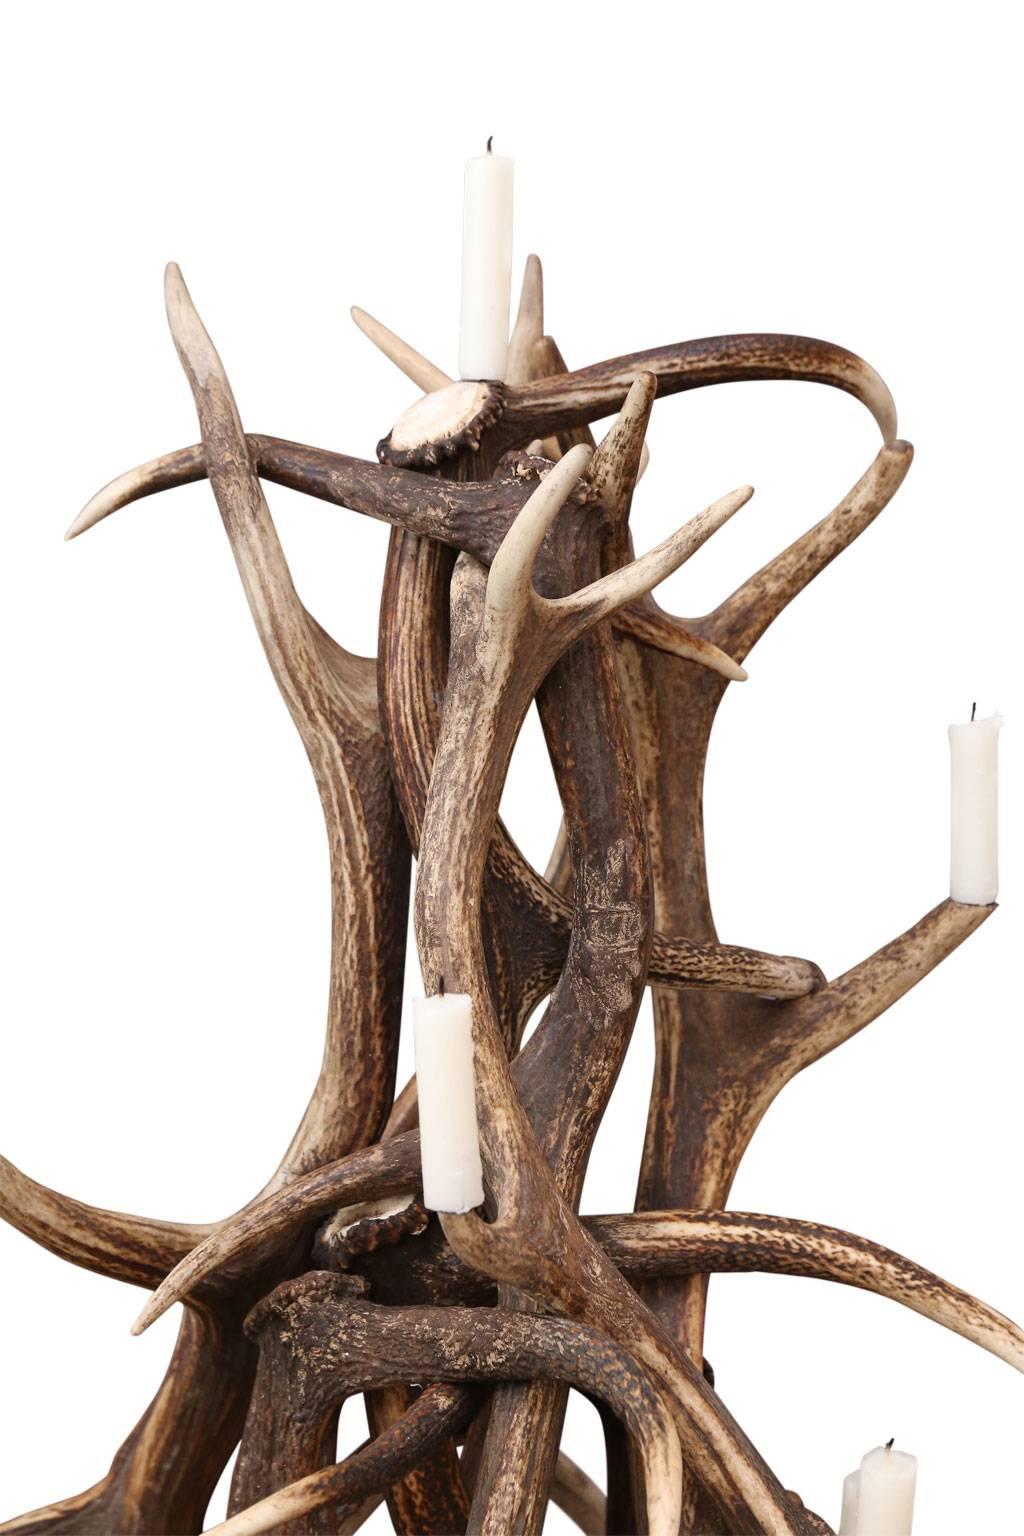 Naturally shed red stag antler tree-shape candelabra. Tree has metal prickets for candles (can also be electrified).